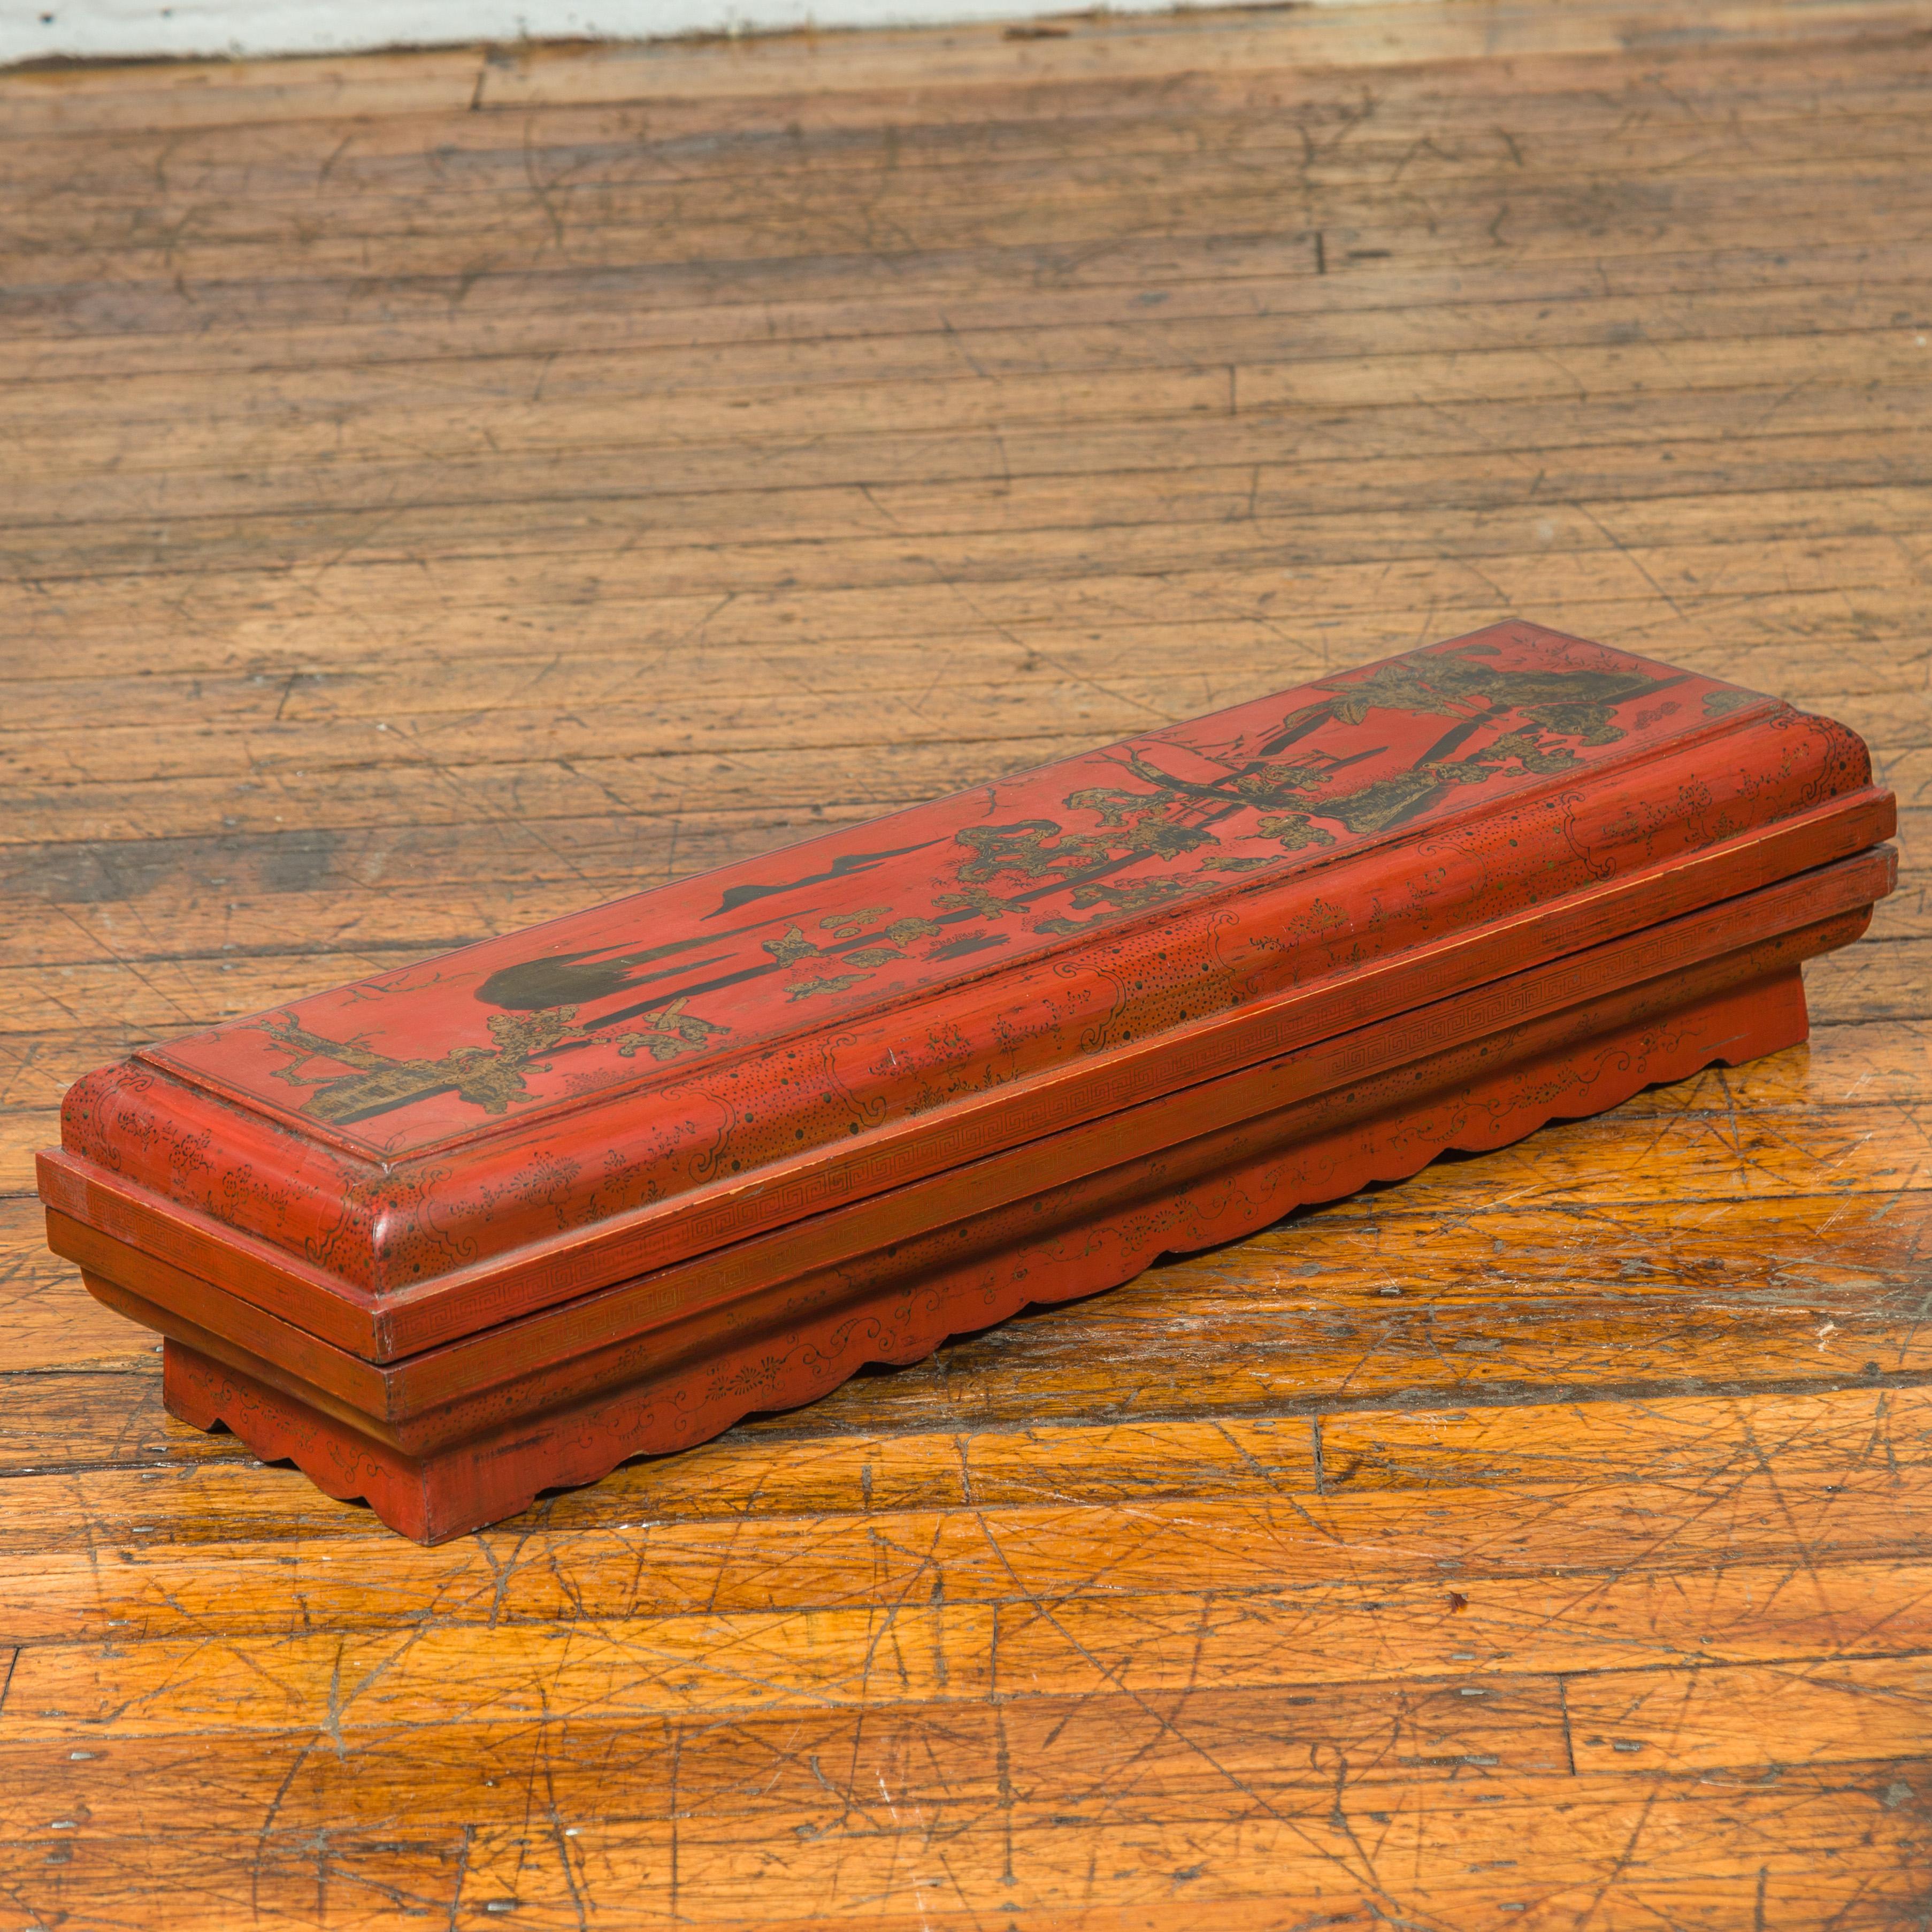 A Chinese Qing dynasty red lacquered lidded scroll box from the 19th century with distressed gold chinoiserie motifs. This exquisite Chinese Qing dynasty red lacquered lidded scroll box from the 19th century captivates with its rich historical charm